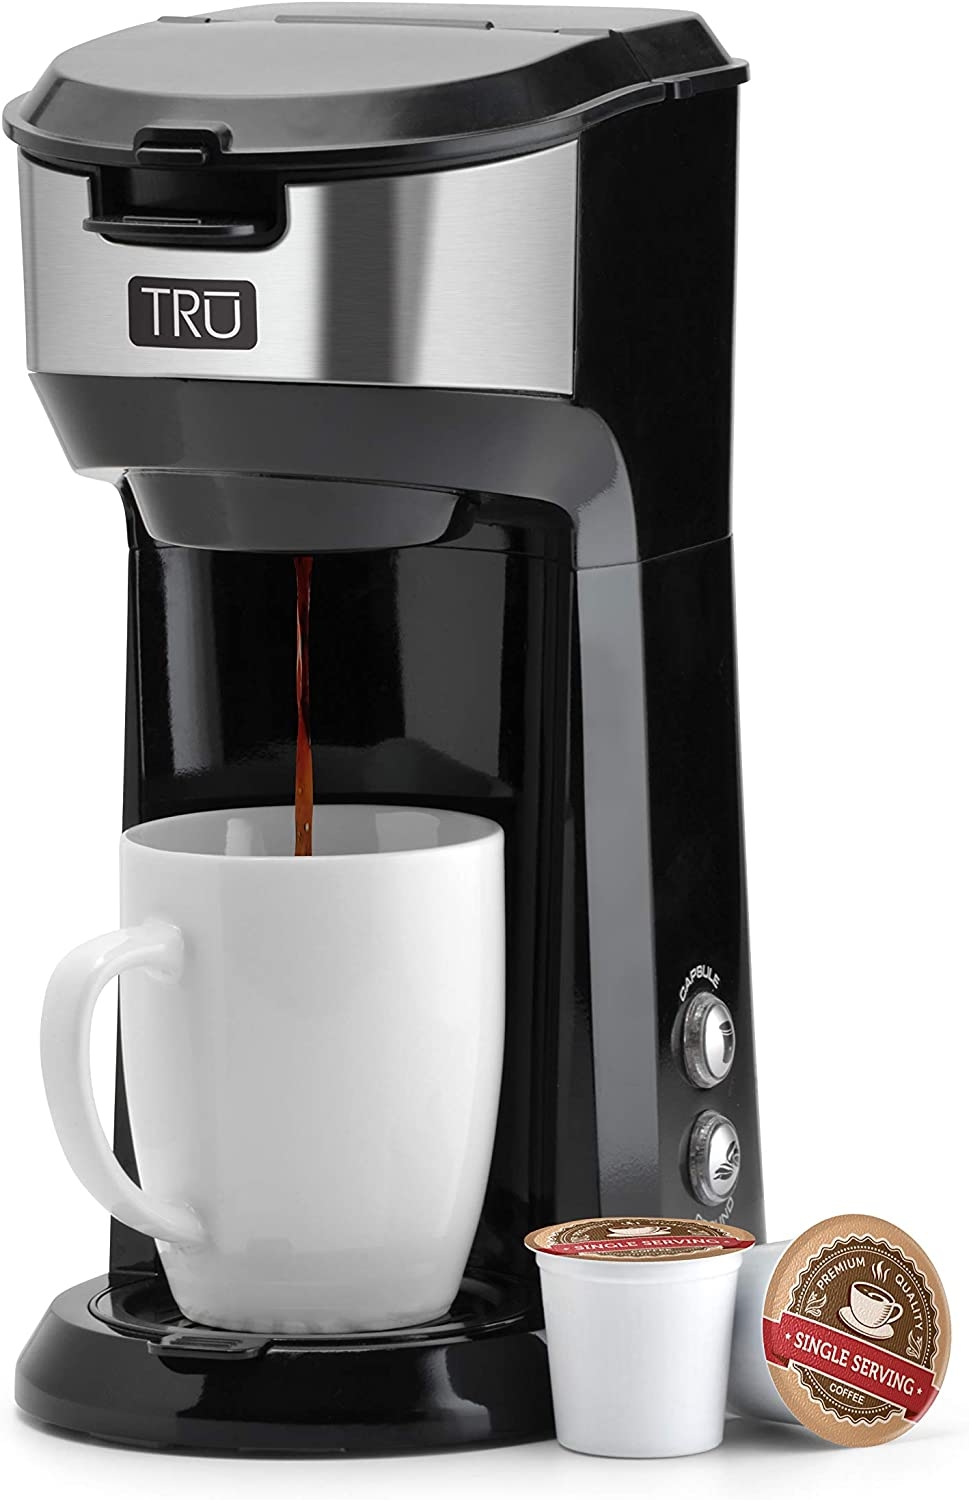 Tru Single Serve Brew System, Black, 3.8 lbs Import To Shop ×Product customization General Description Gallery Reviews